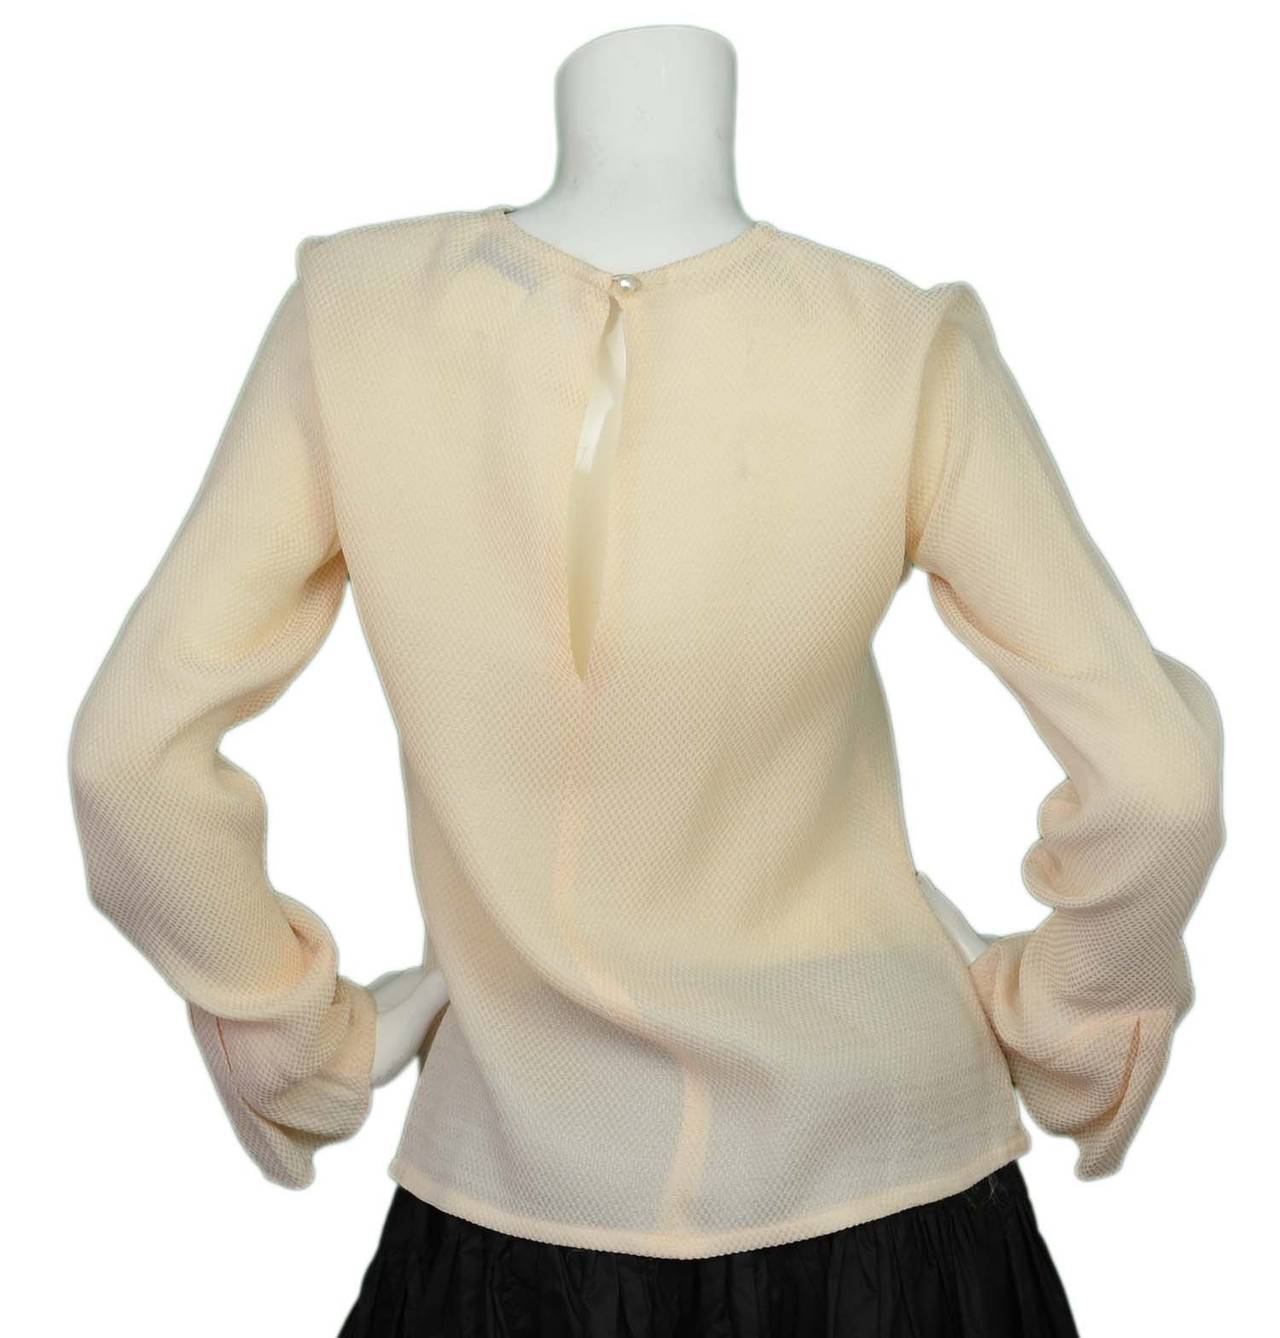 Women's CHANEL Cream Waffle-Print Blouse with Pleated Sleeve Detail sz 38